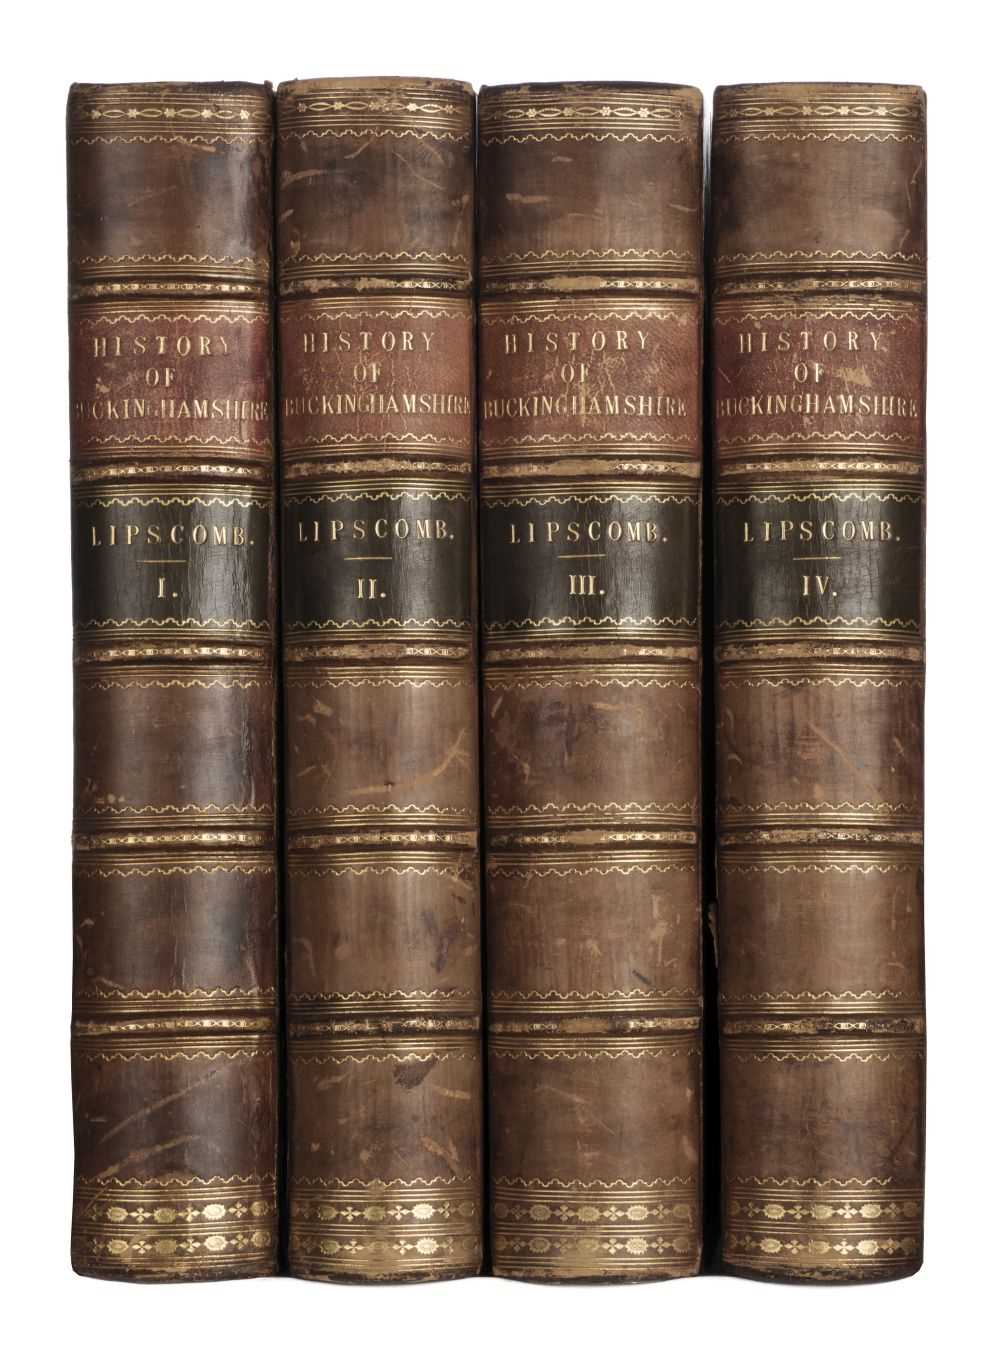 Lot 48 - Lipscomb (George). The History and Antiquities of the County of Buckingham, 4 vols., 1847